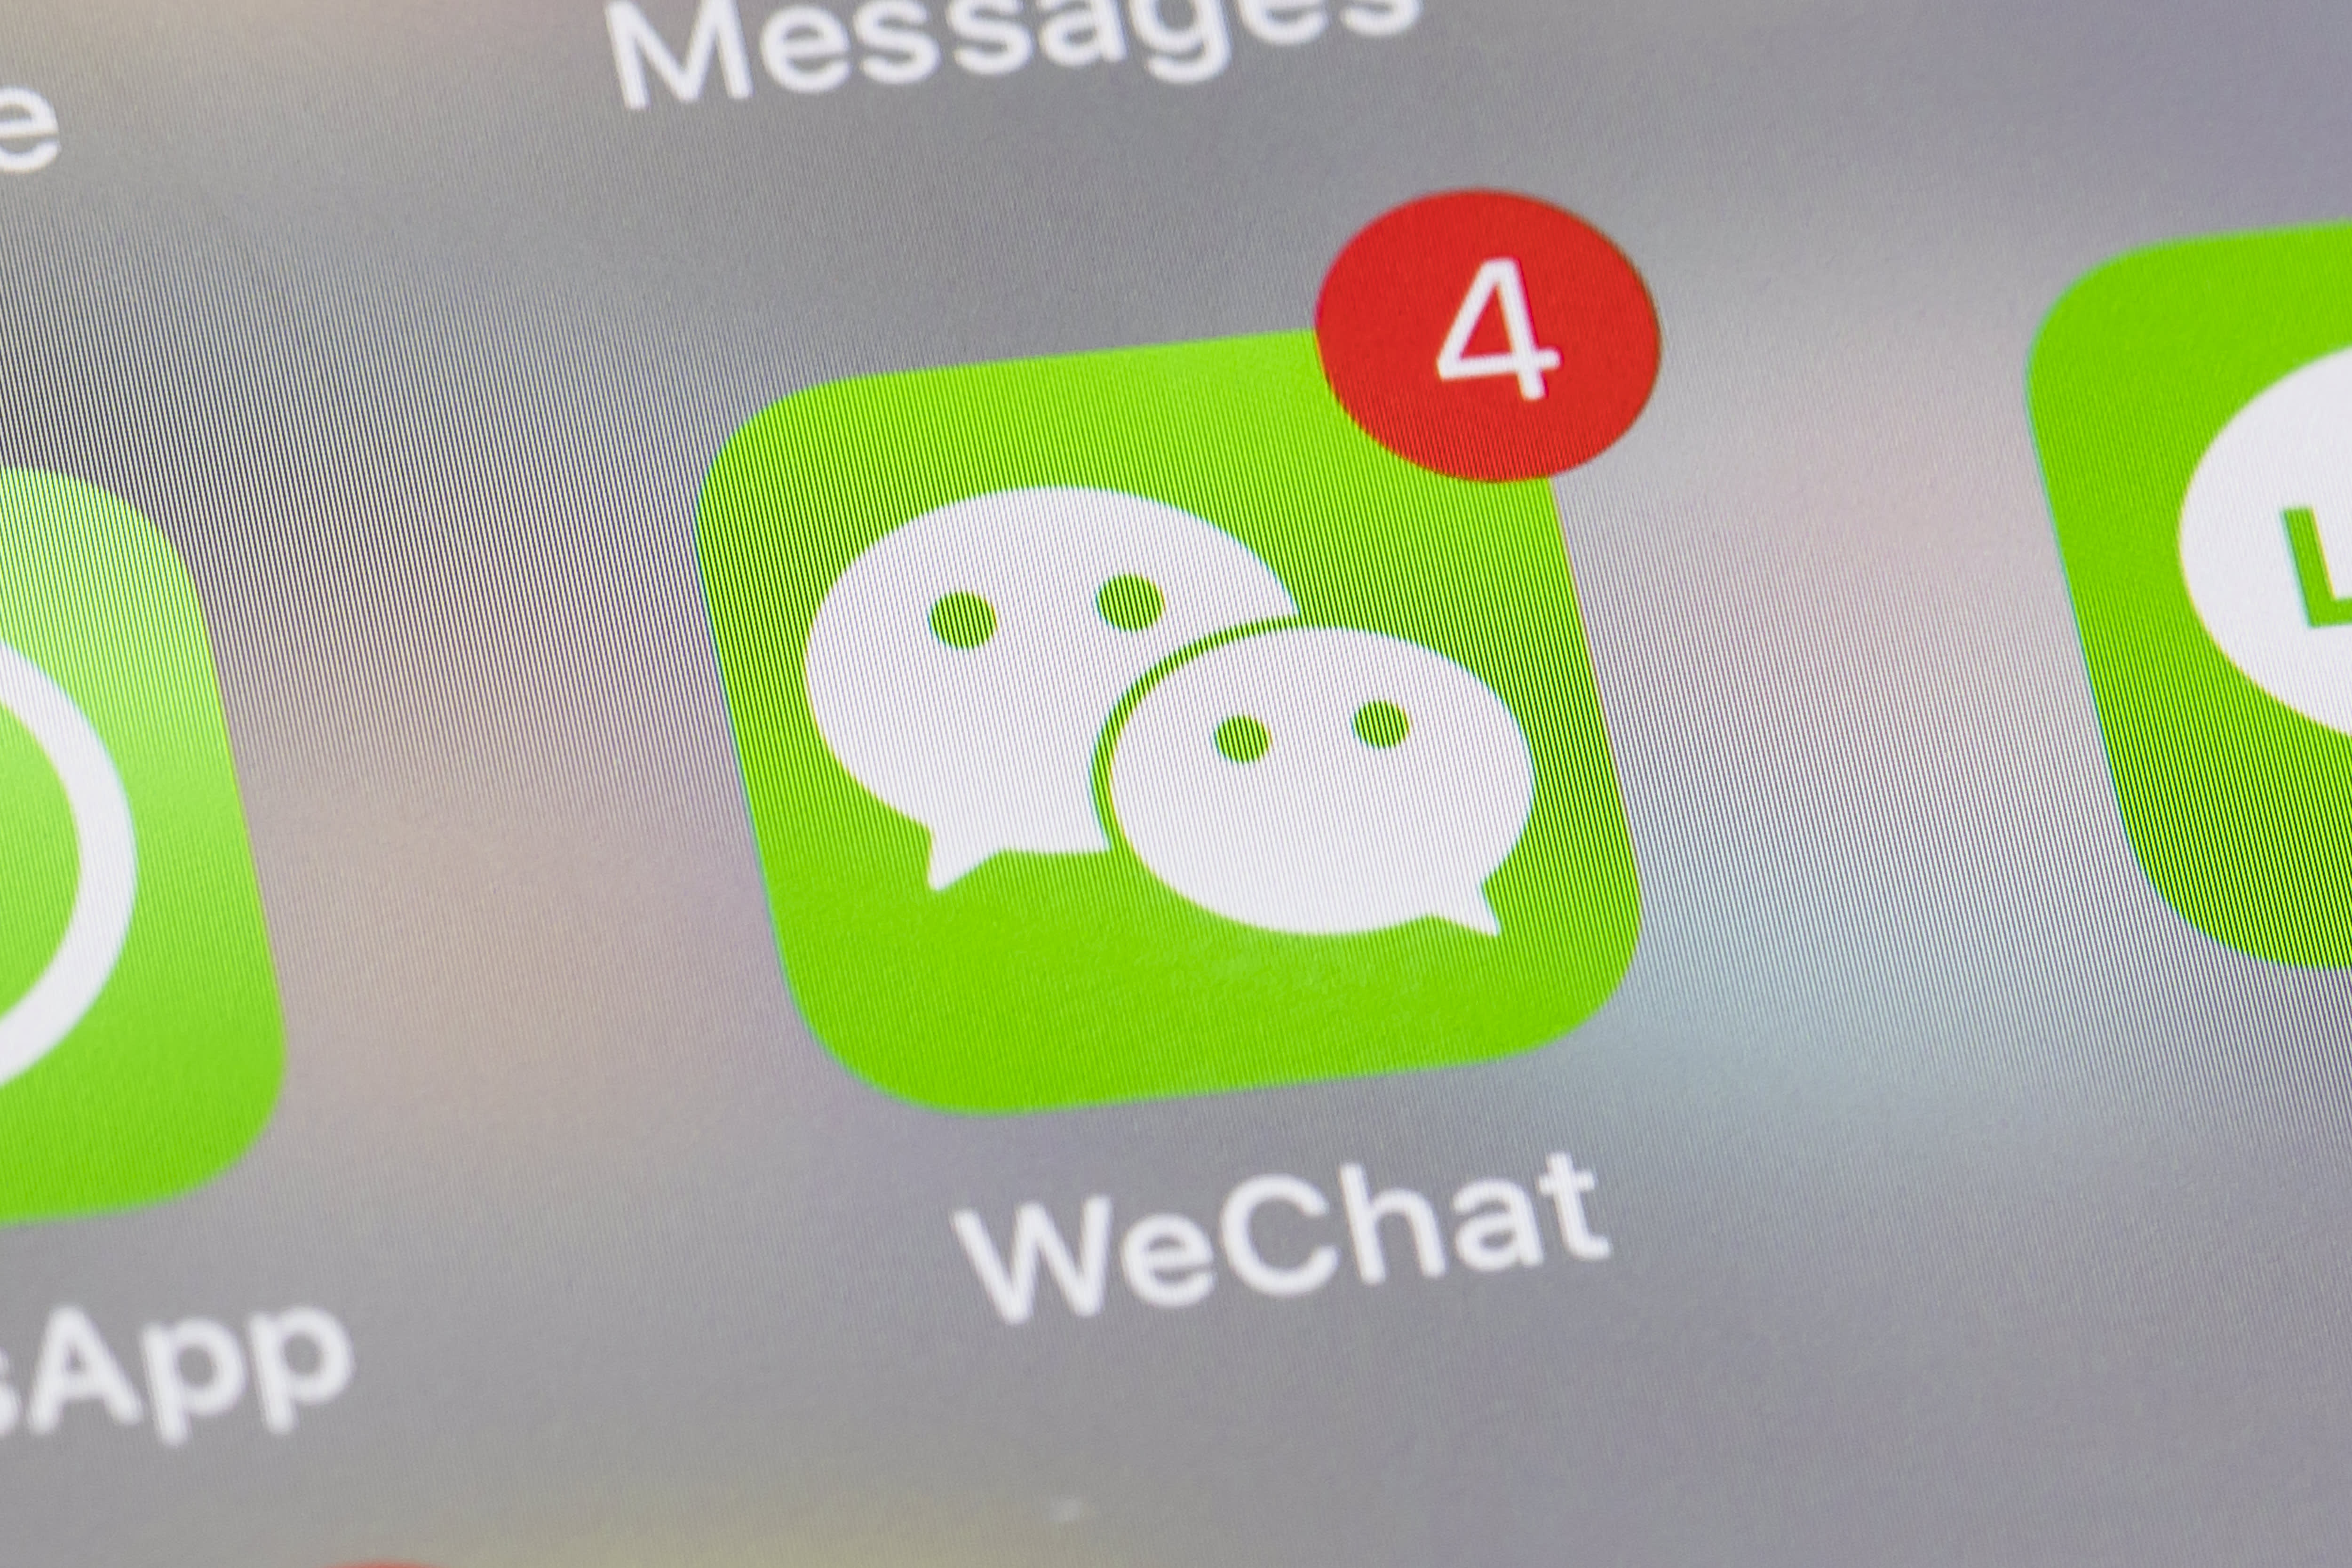 China’s digital currency comes to its biggest messaging app WeChat, which has over a billion users